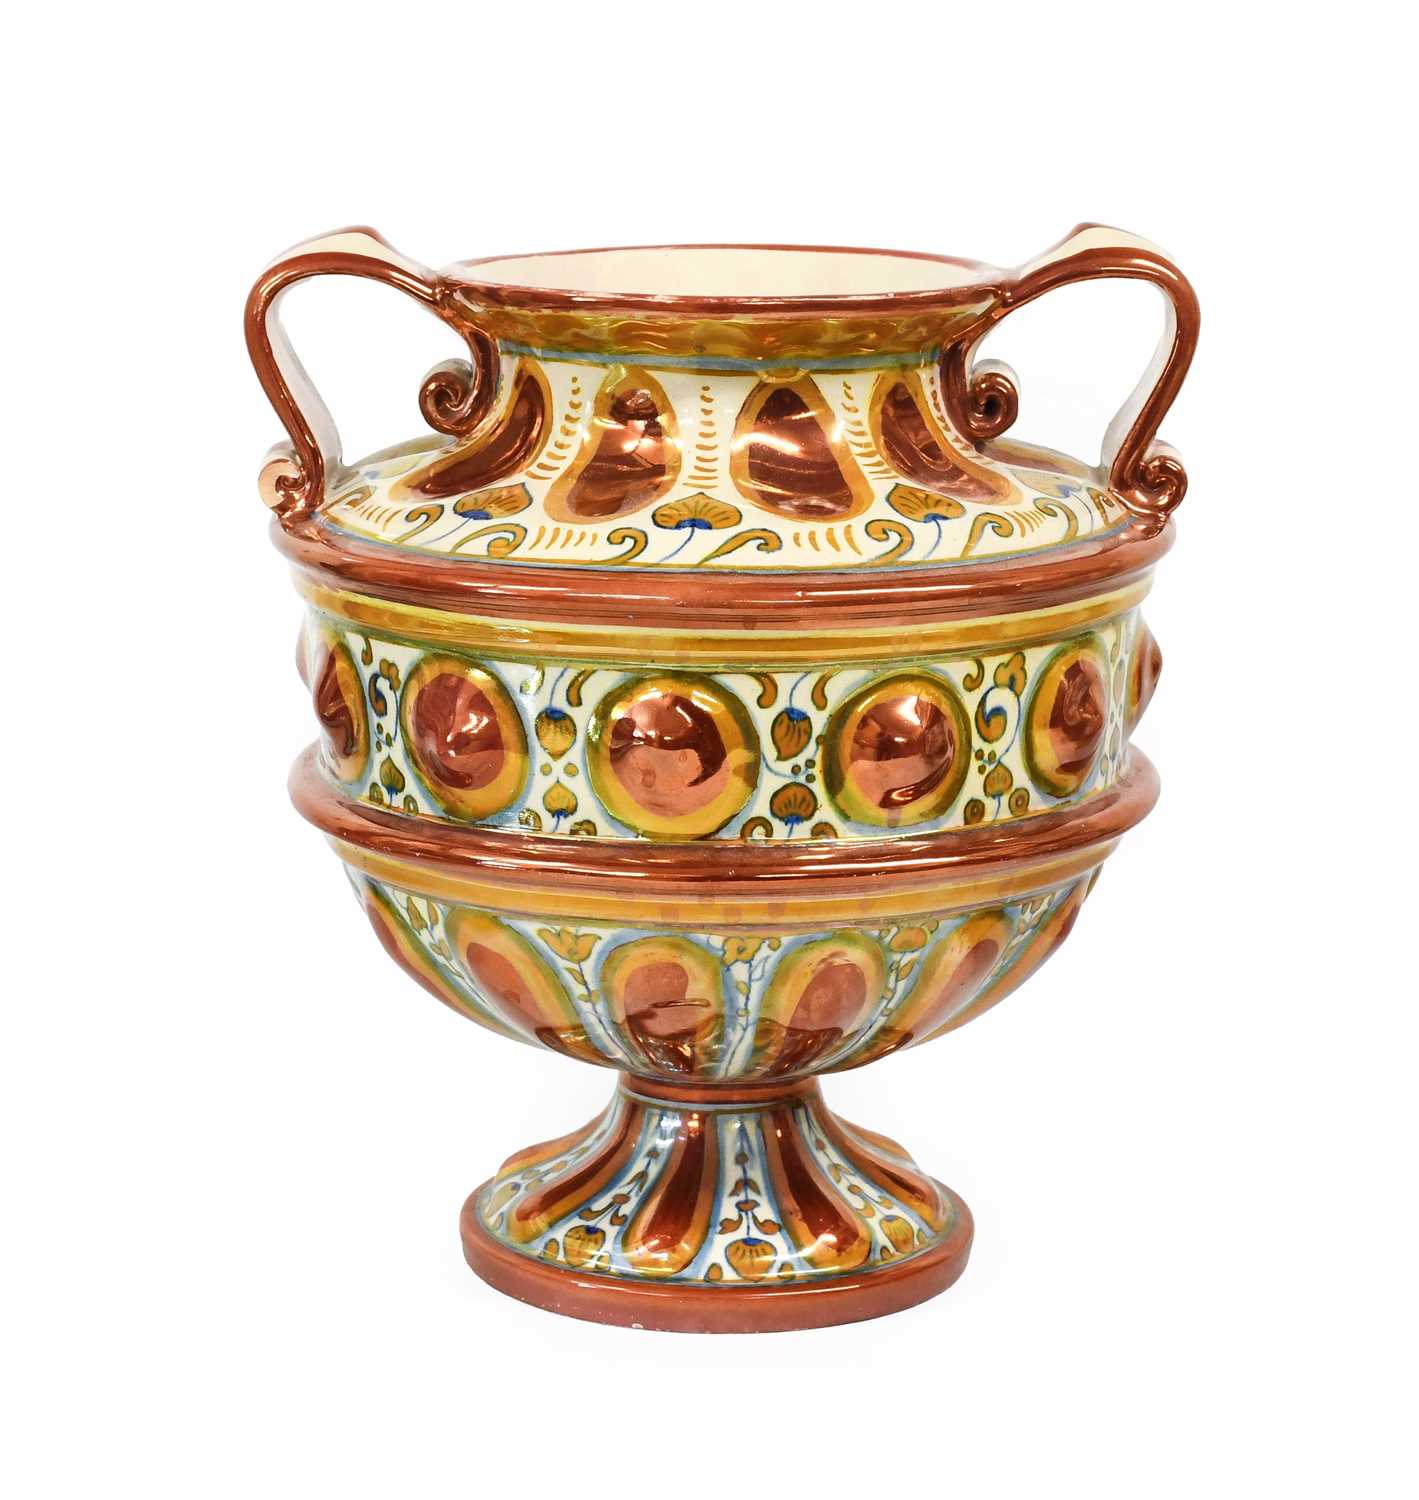 A Cantgalli Faience Vase, late 19th / early 20th century, of twin-handled pedestal form, painted